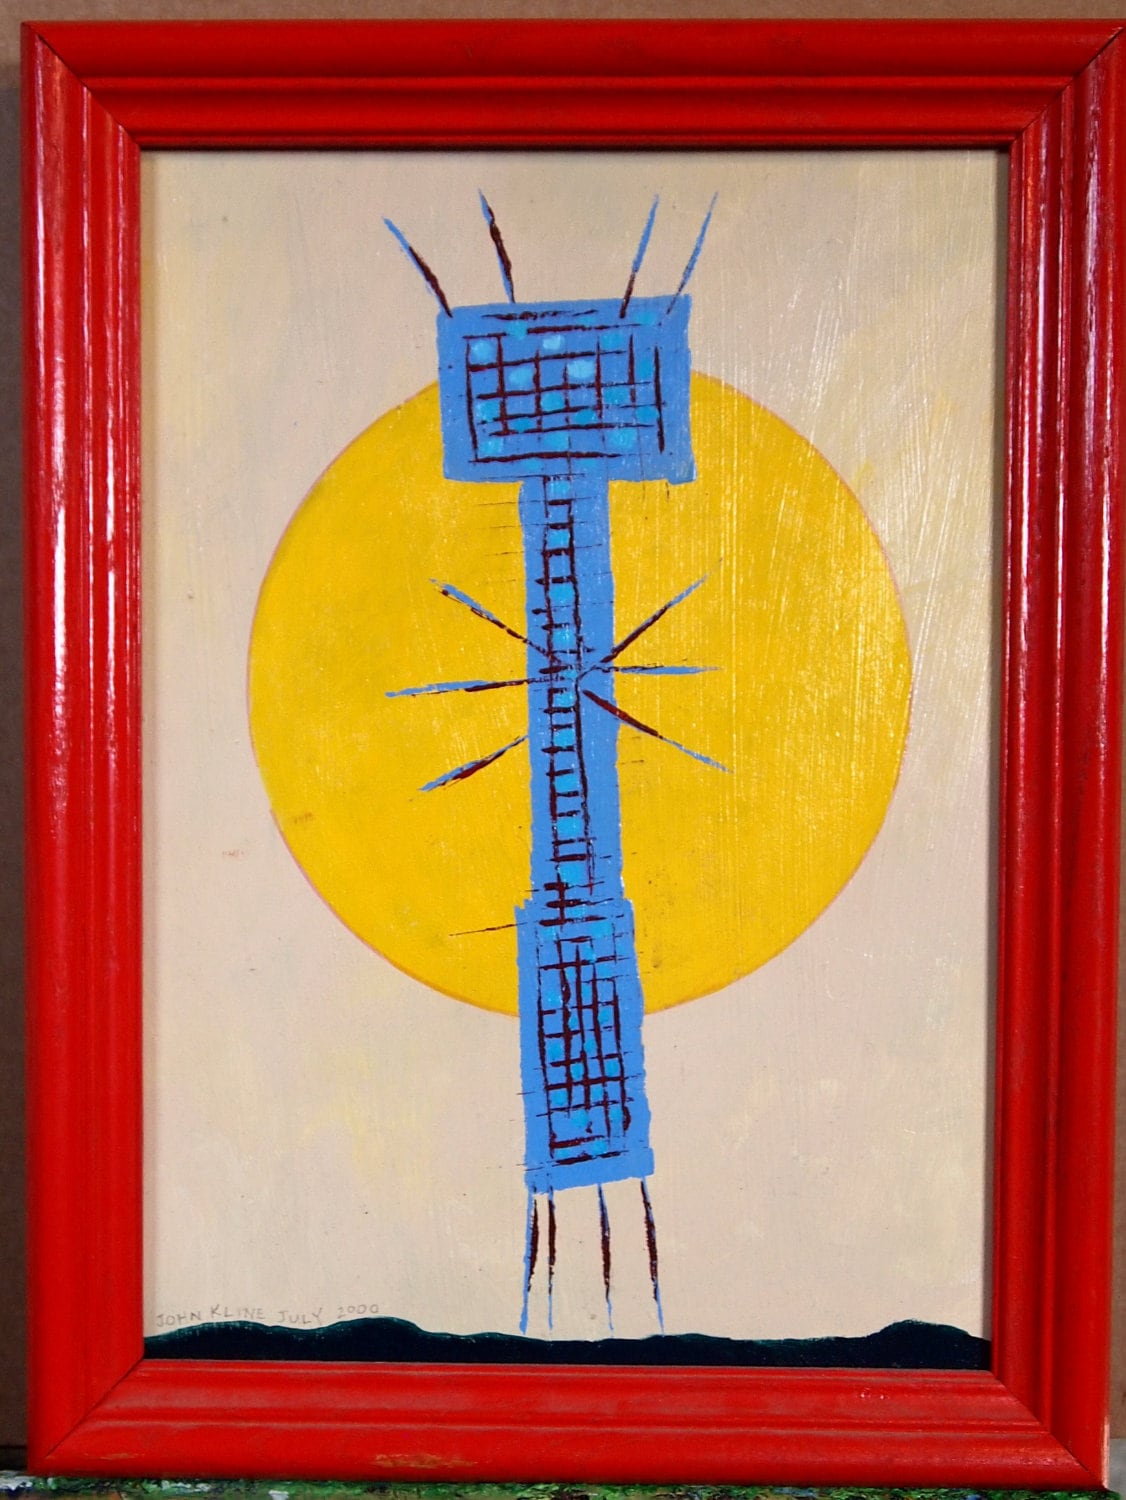 Waiting for Godot. Acrylic on Cardboard. Framed. 10" x 14". 2000. Original Painting. Klee. Abstract. Surrealism.